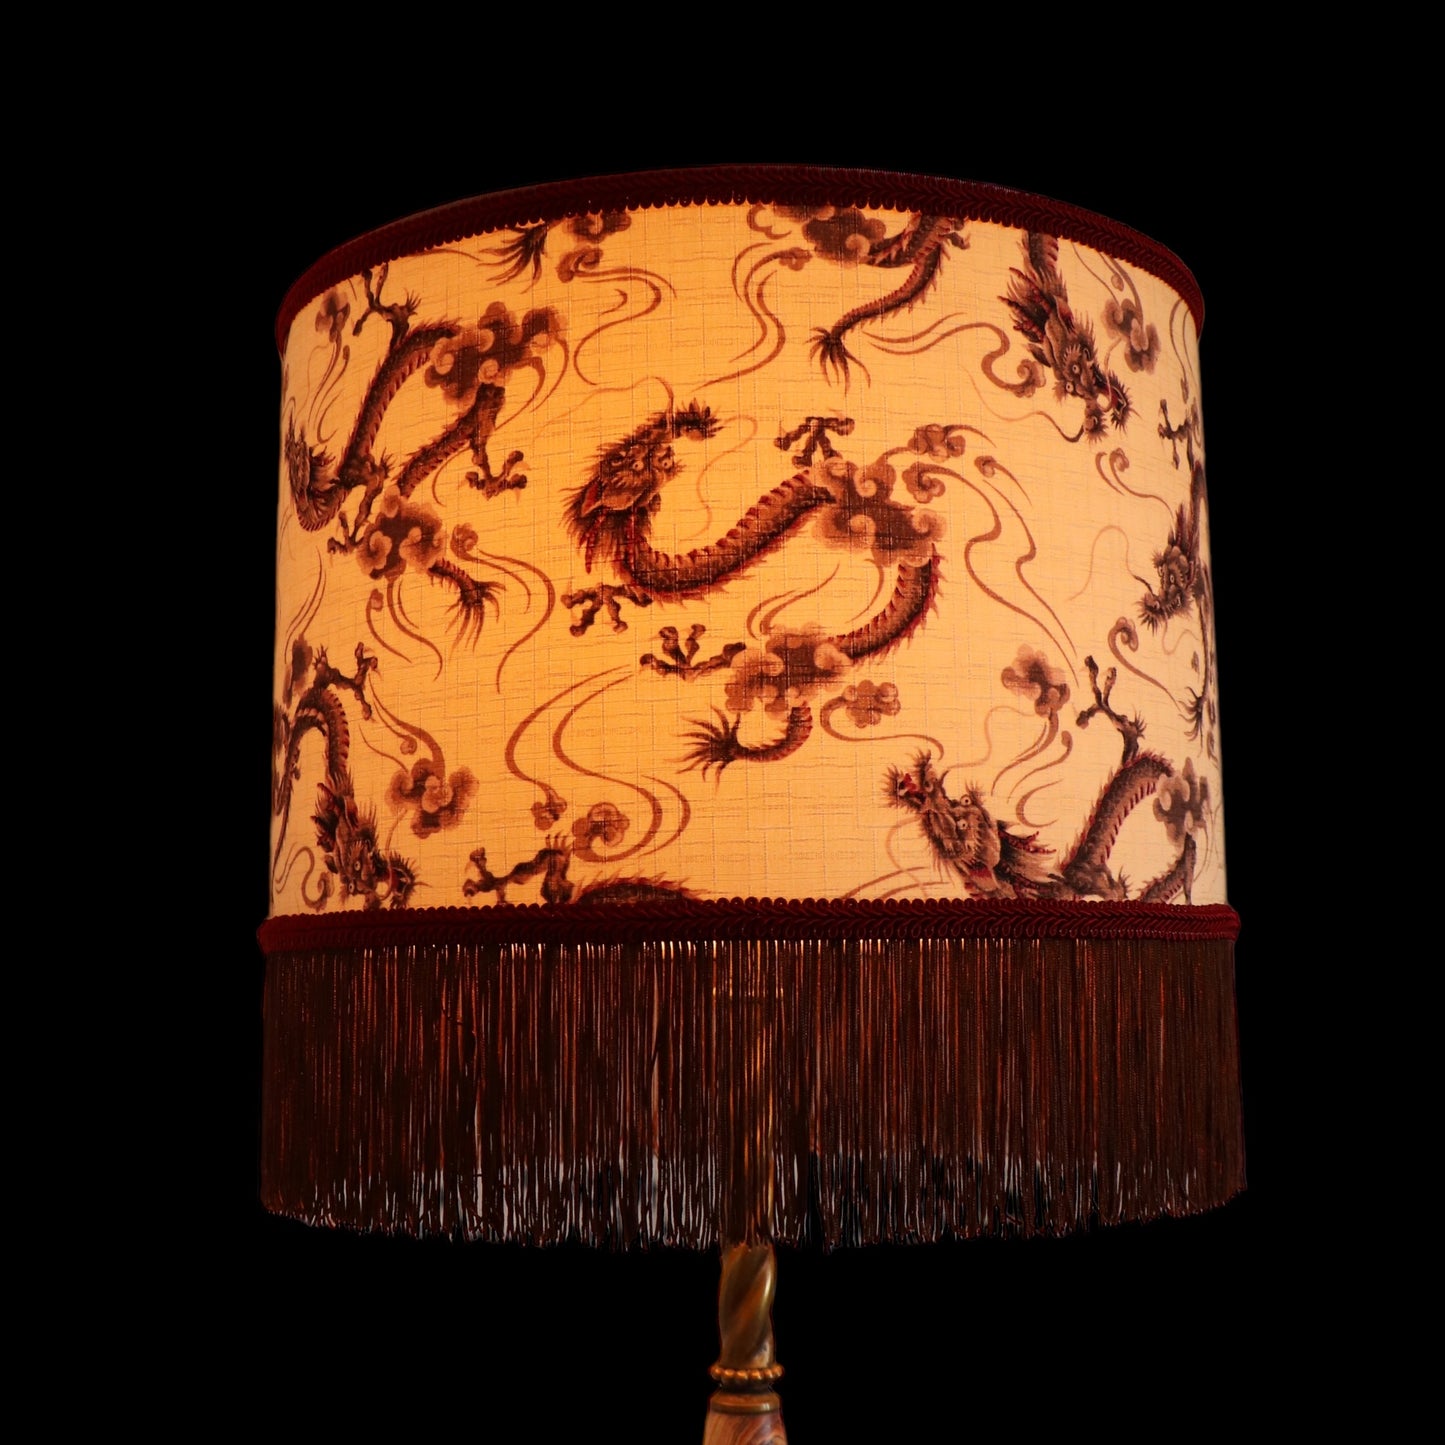 DRAGONS lampshade laminated in Japanese fabric, ref D2